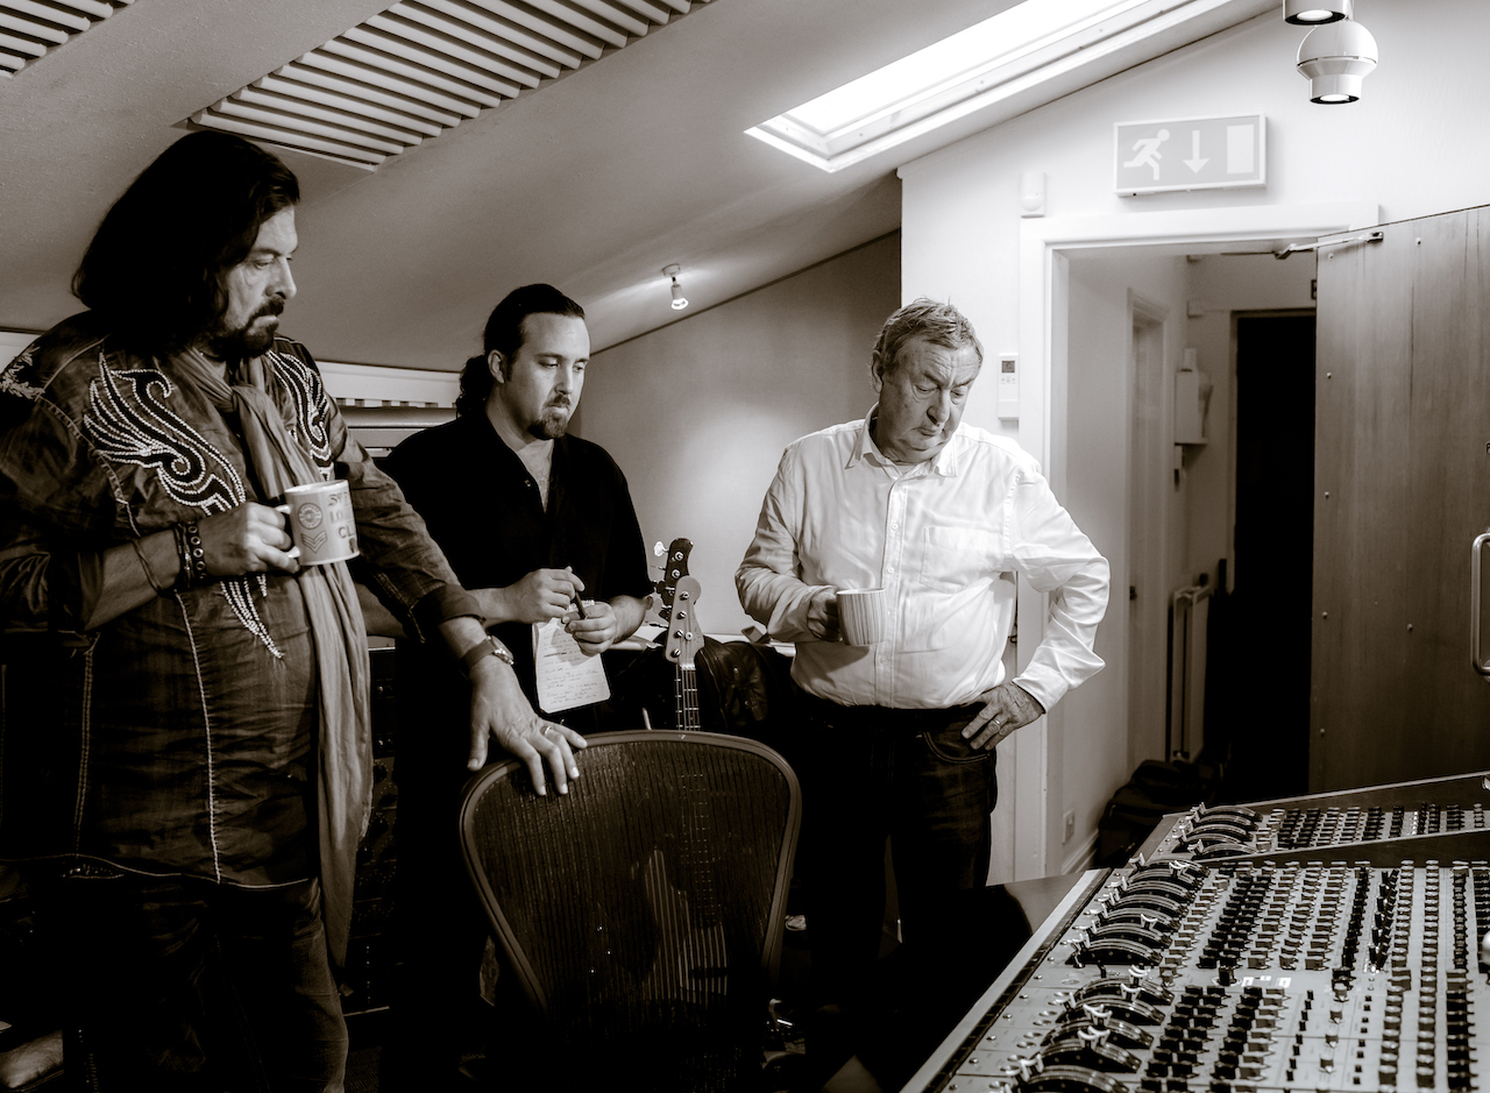 Alan Parsons, Dave Kerzner and Nick Mason listen to a playback recorded on the vintage EMI mixing console